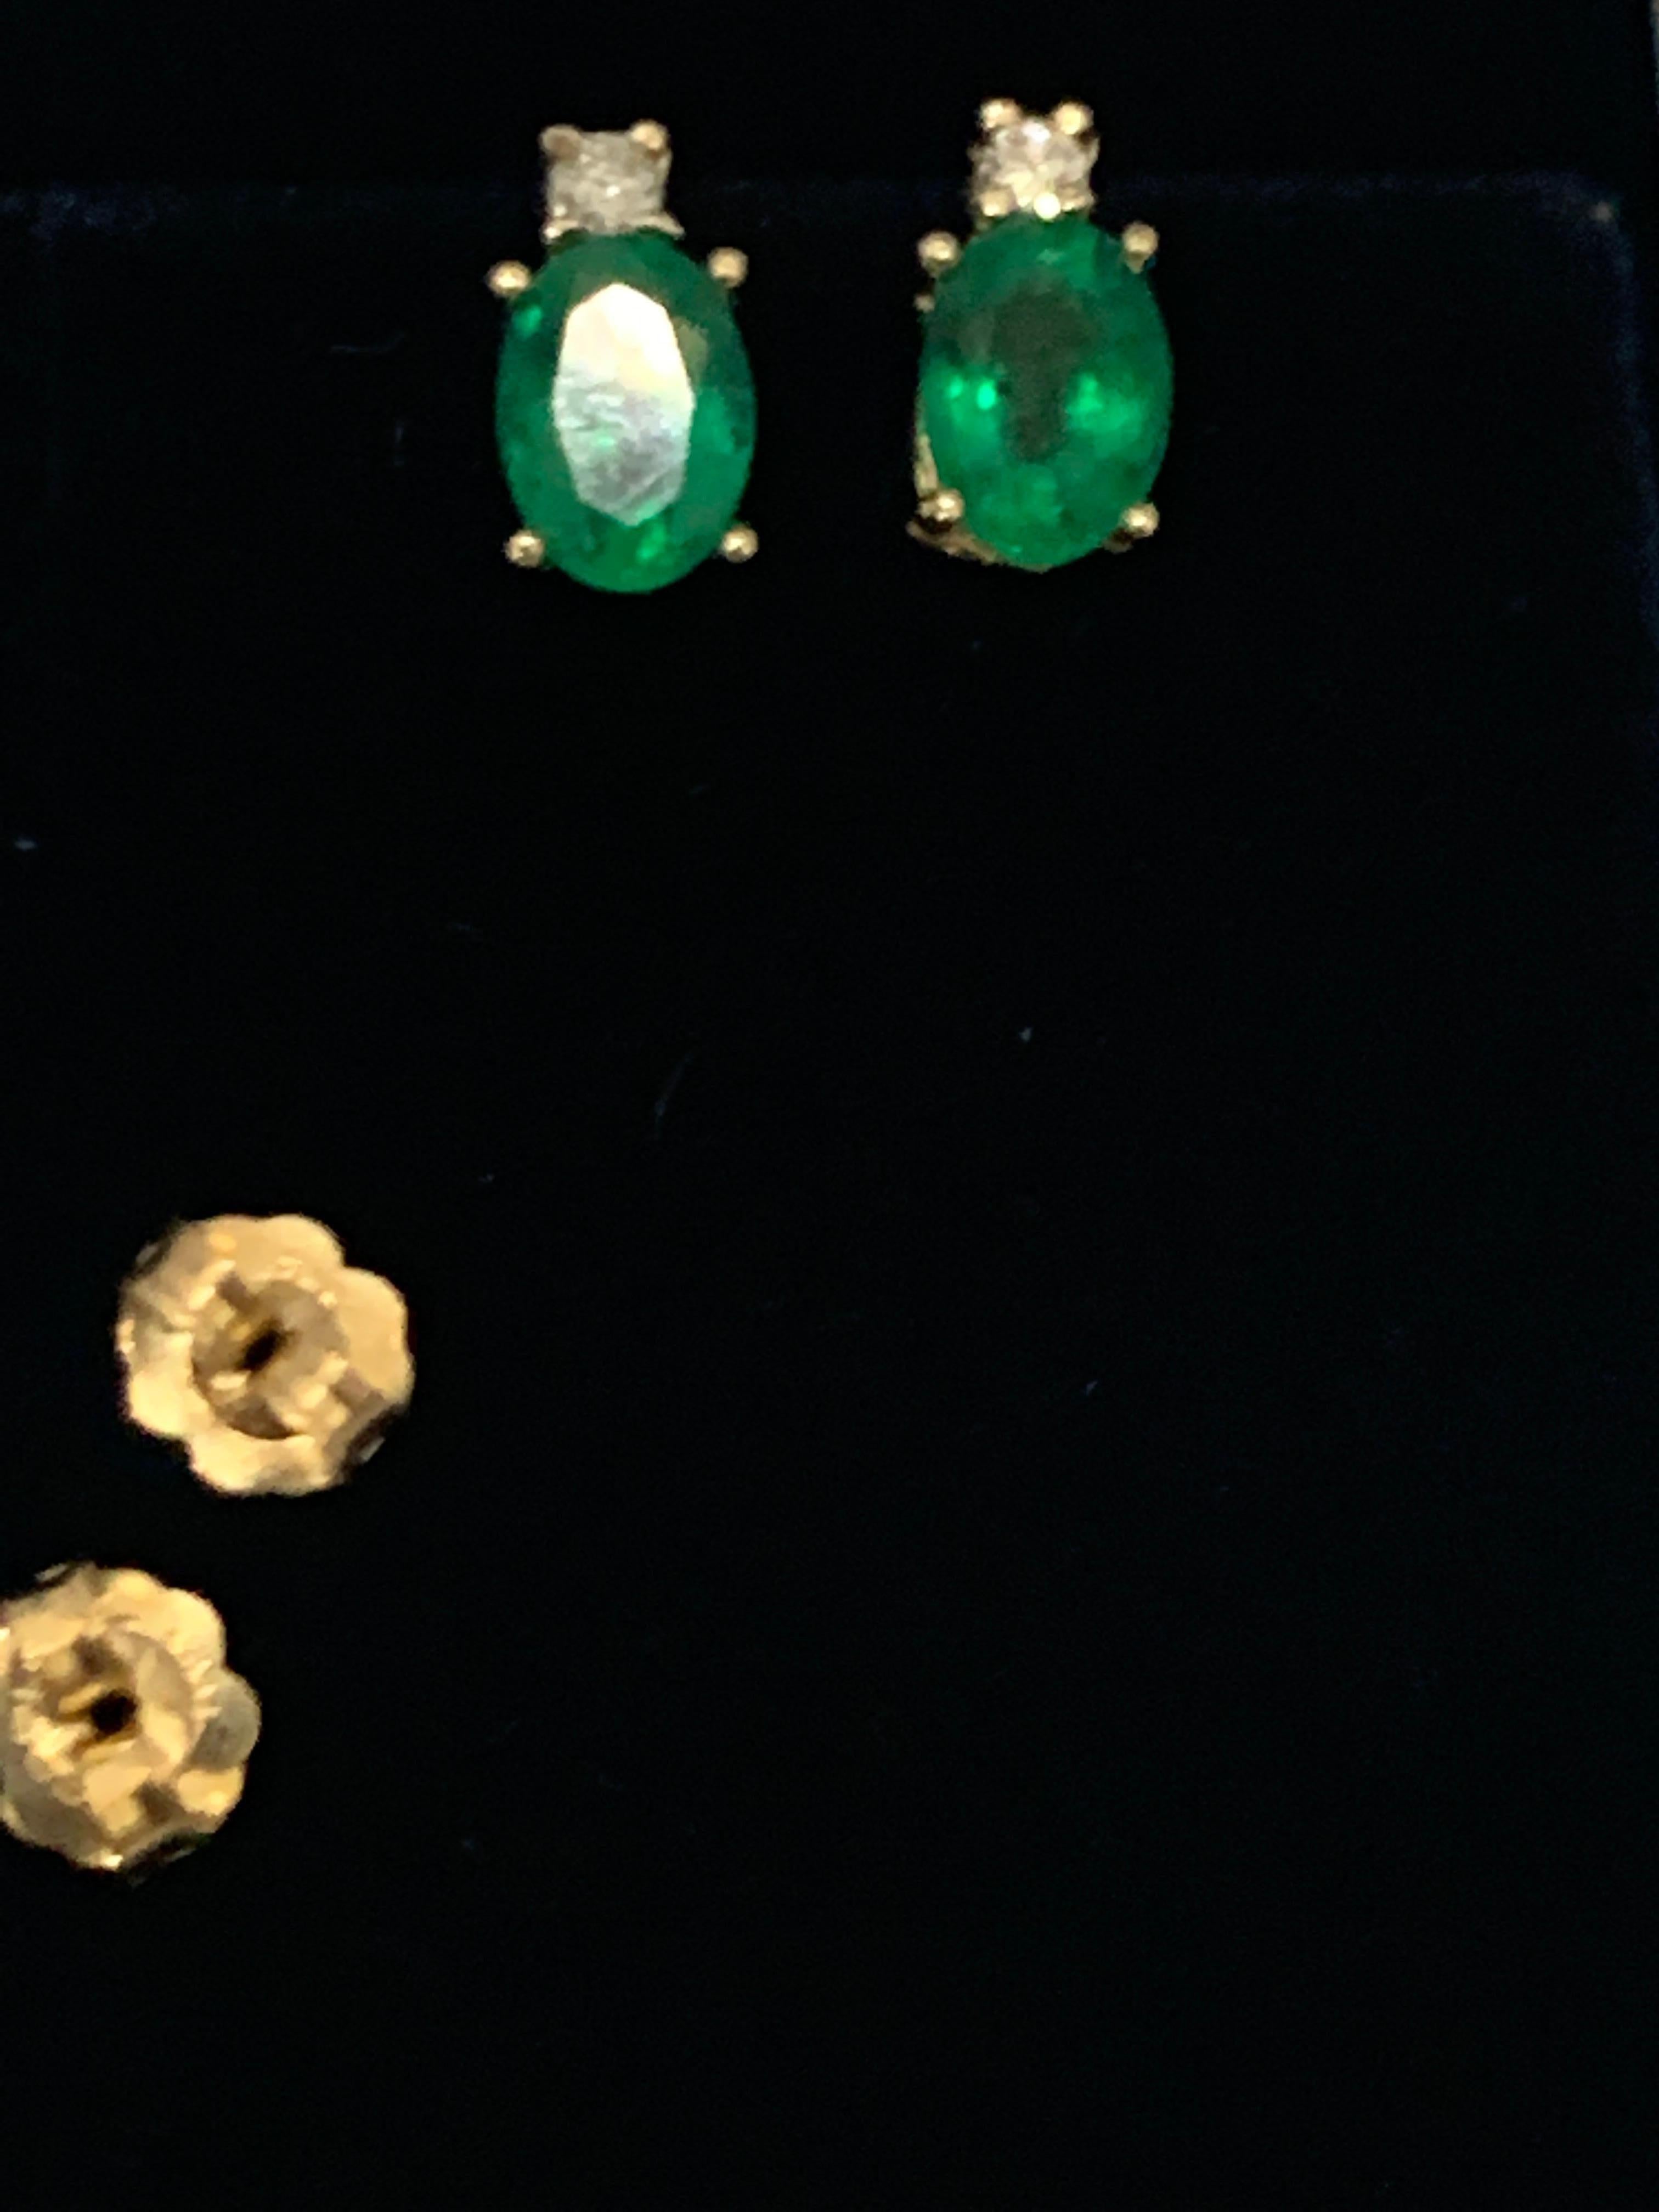 
1.70 Carat 7 X 5 MM Oval Natural Emerald Stud Post Earrings 14 Karat Yellow Gold
Two emerald weighing approximately  1.7 carats Total
Each emerald is 0.85 Ct
Each stud has a tiny diamond on the top of the emerald.
Nice quality of emerald is used to